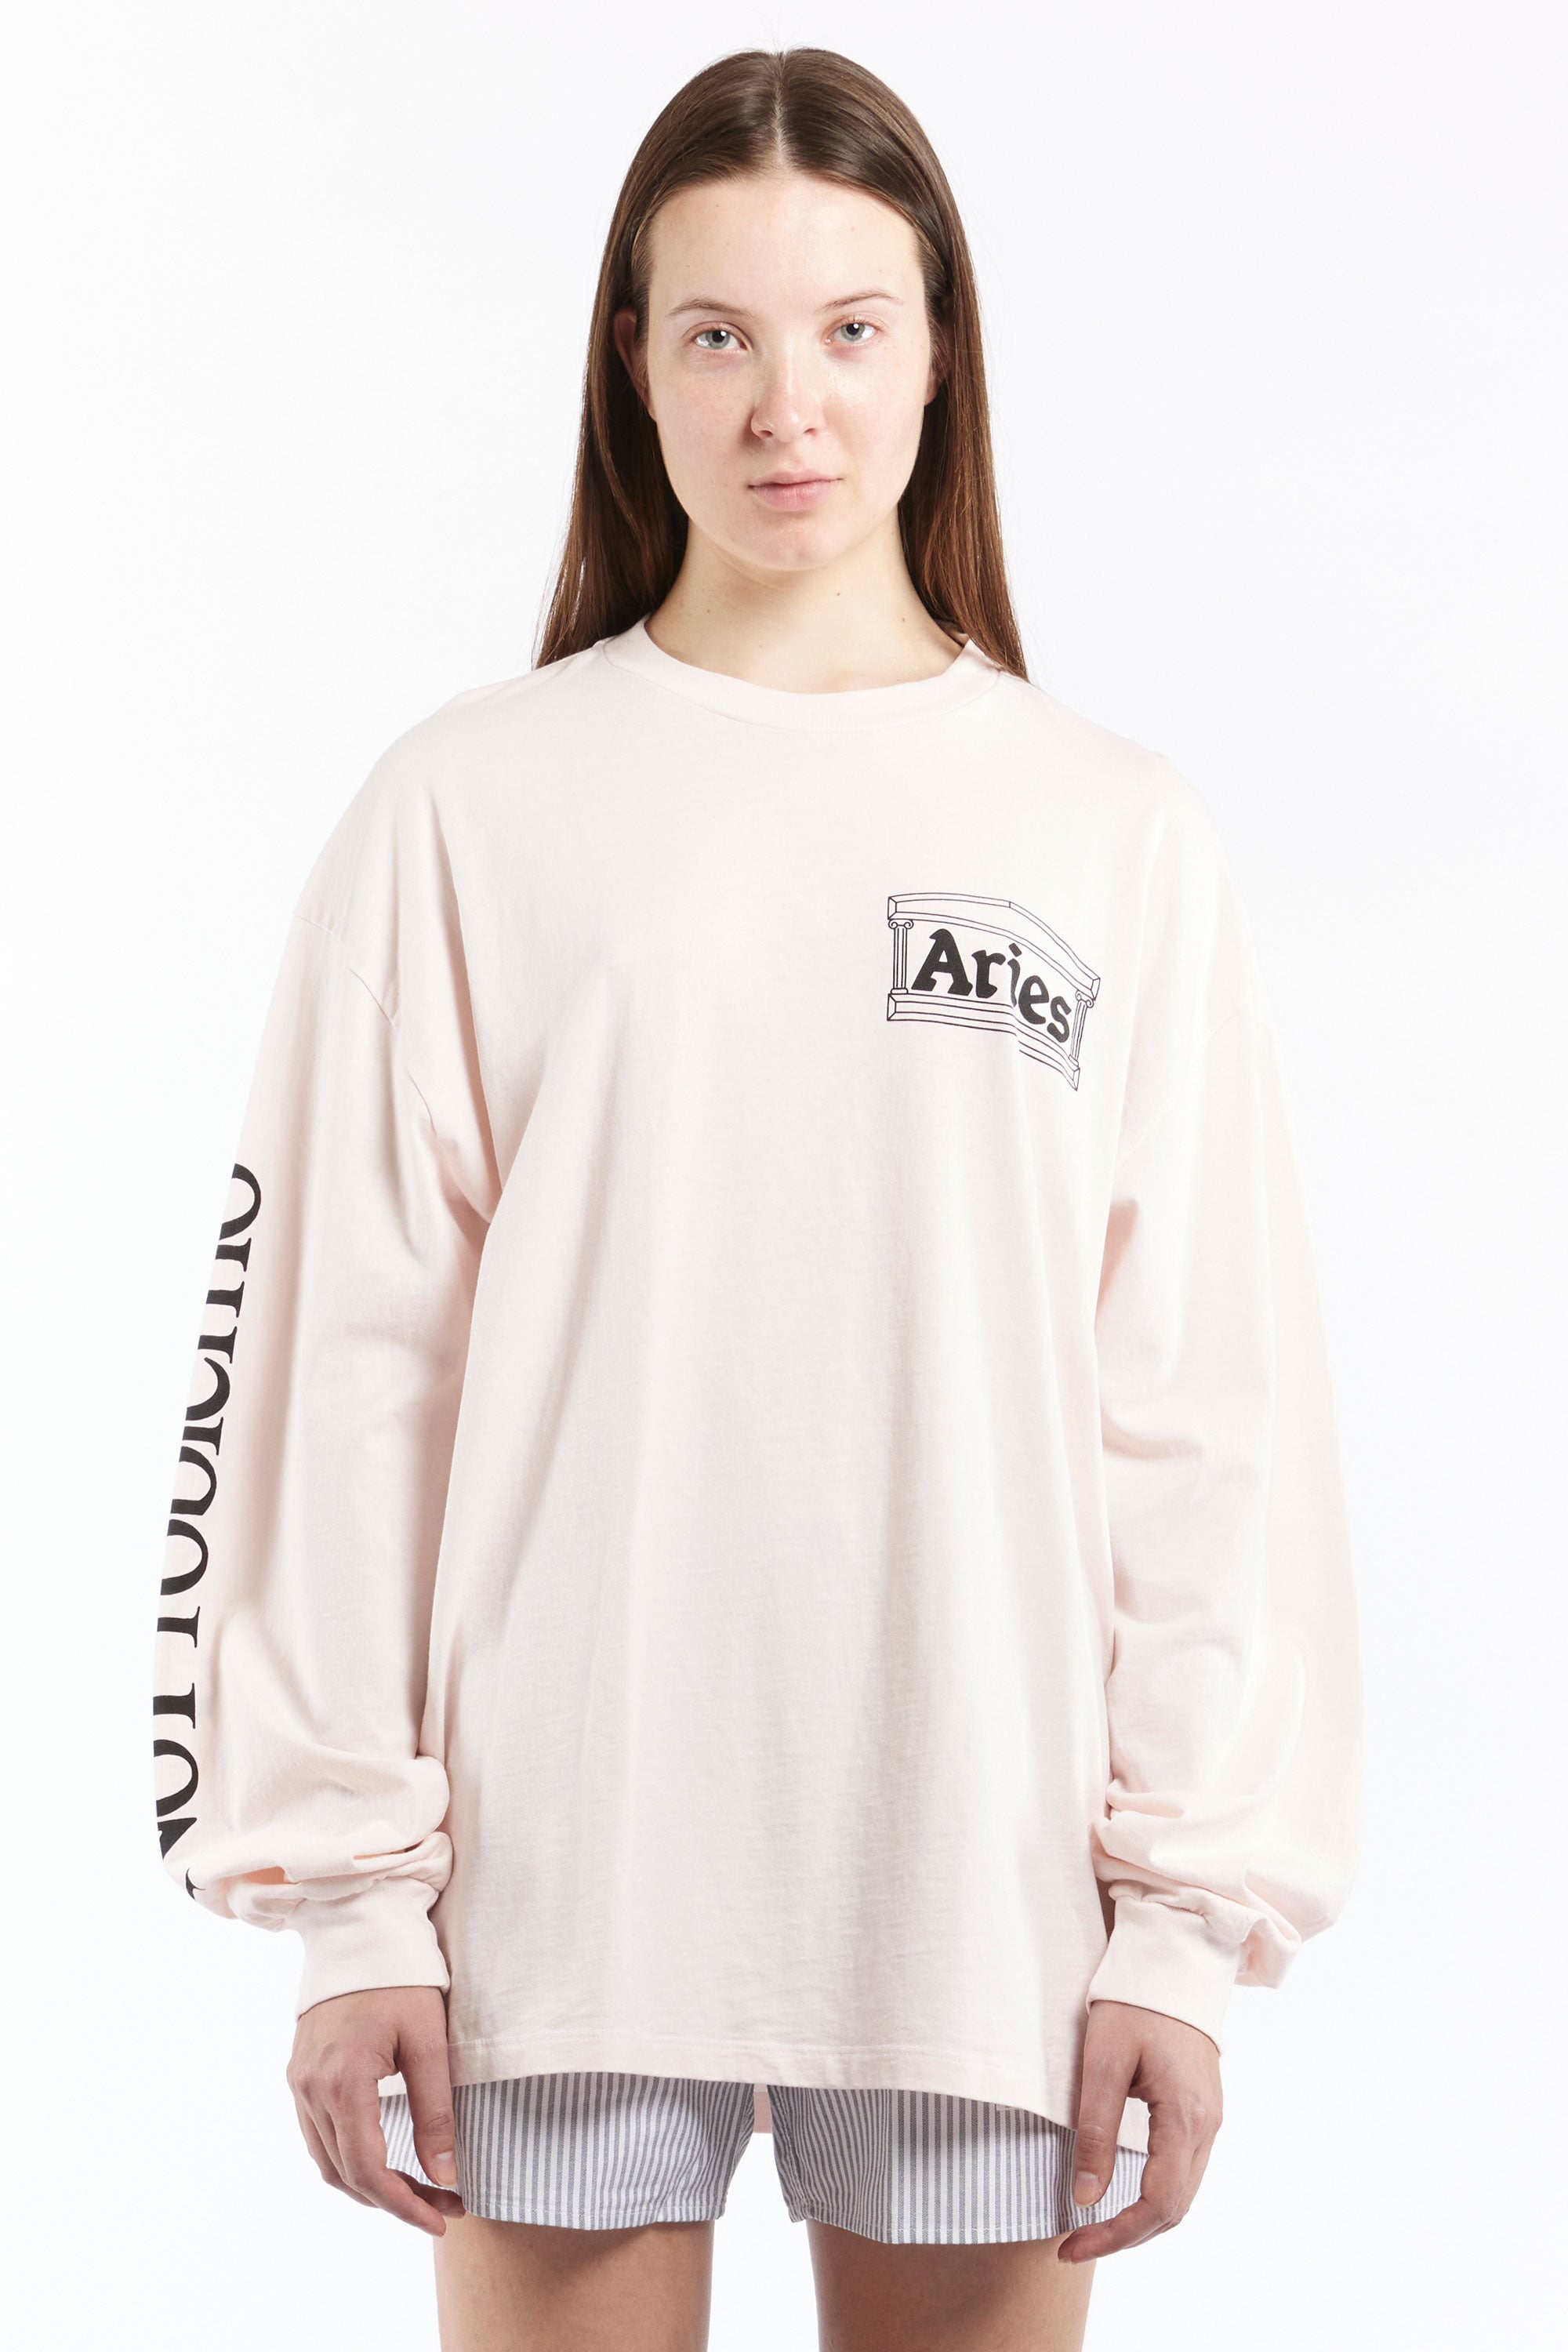 The ARIES - RAT LS TEE PINK available online with global shipping, and in PAM Stores Melbourne and Sydney.